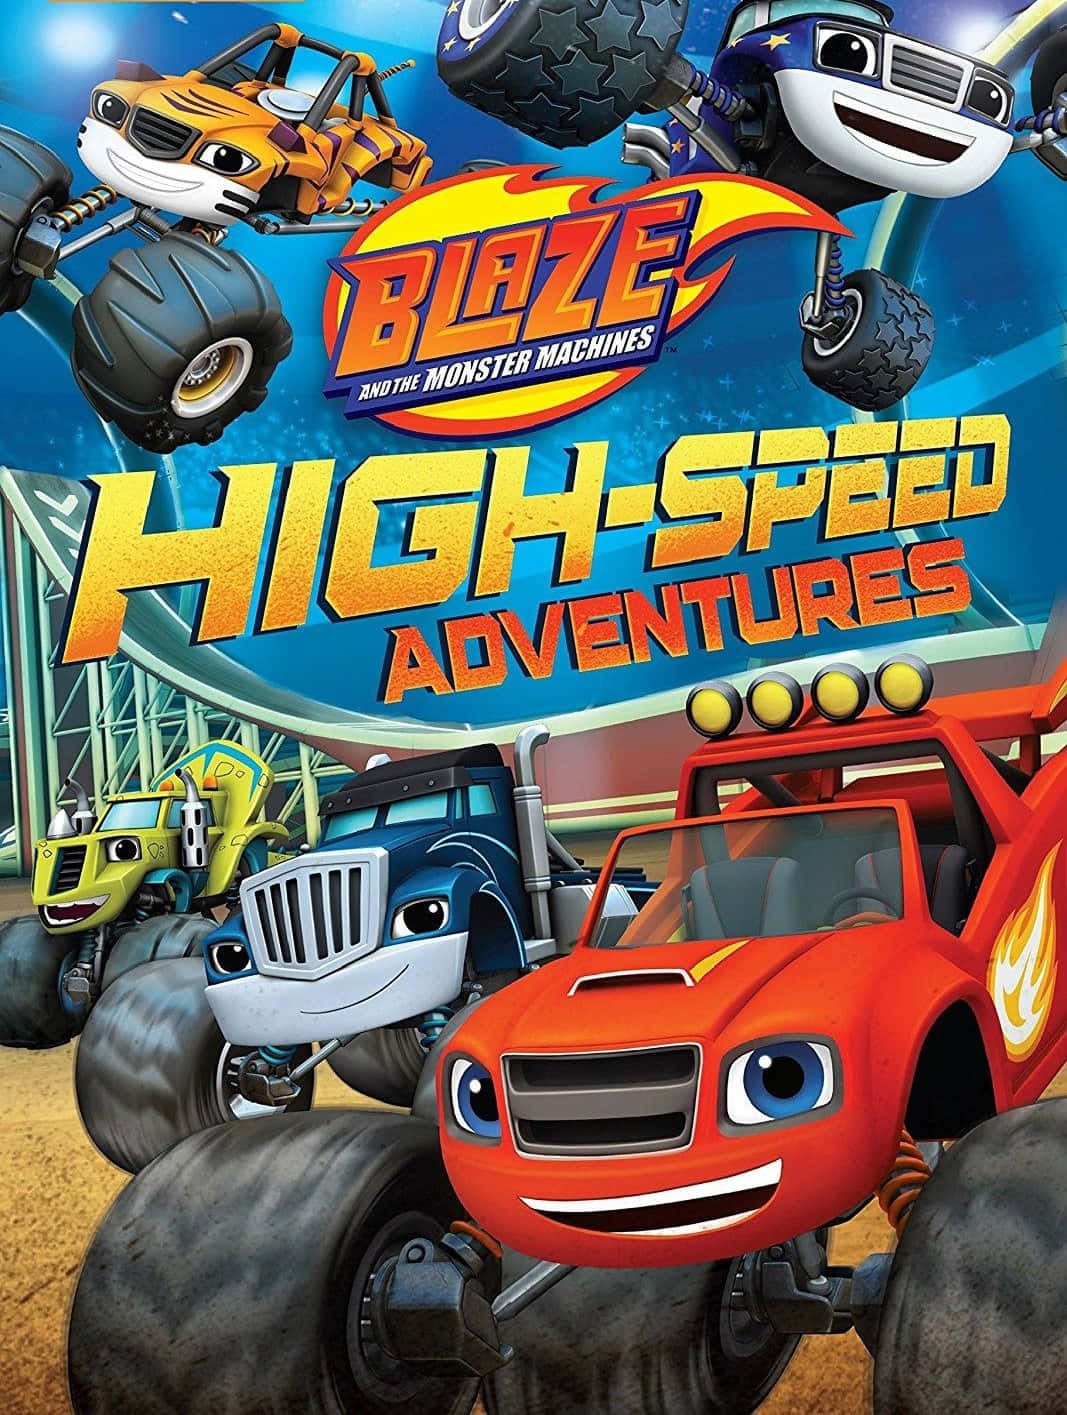 Download A Poster For Blaze High Speed Adventures | Wallpapers.com